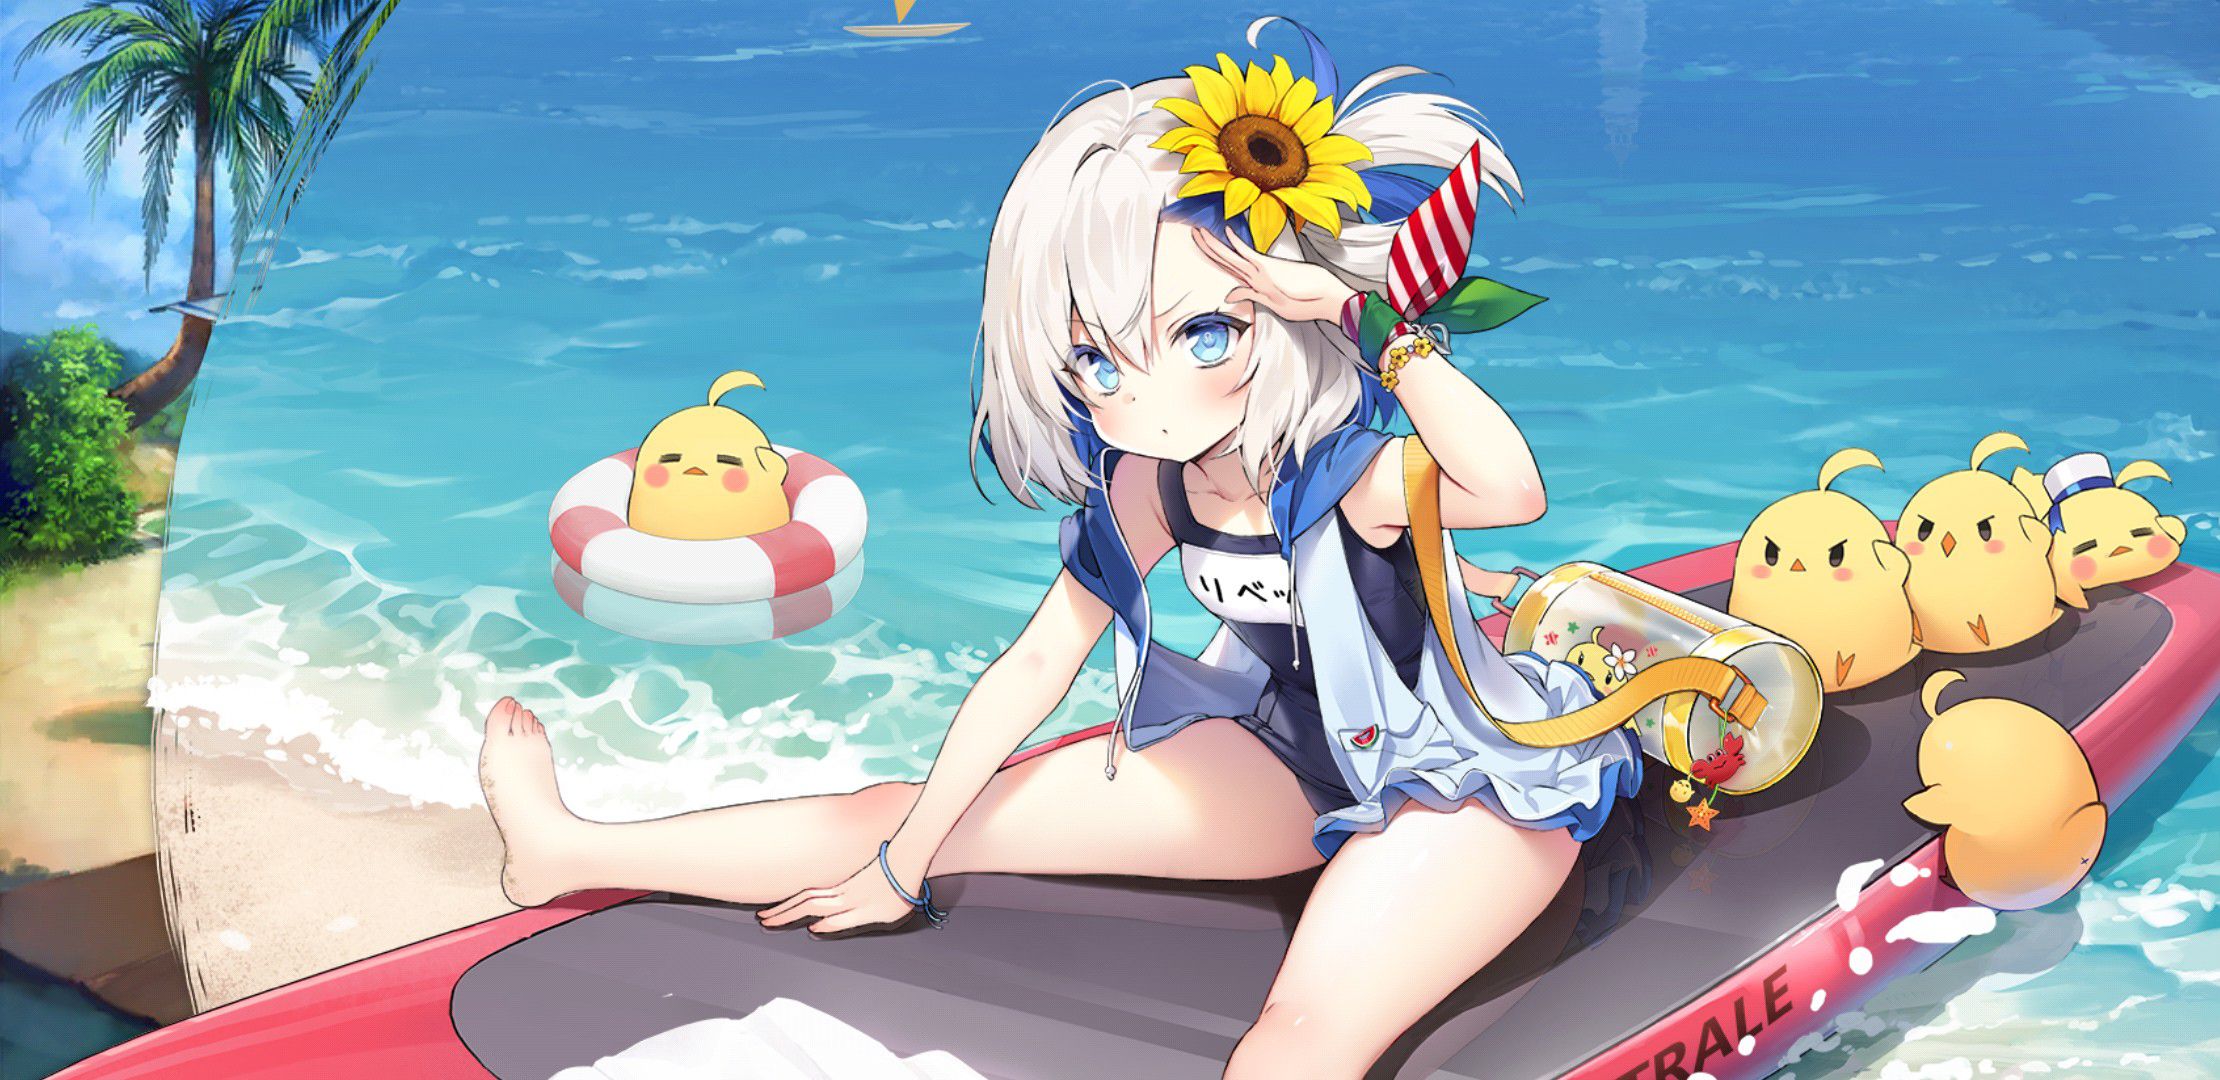 【There is an image】 Smartphone that urges charging with erotic swimsuits is malicious 26